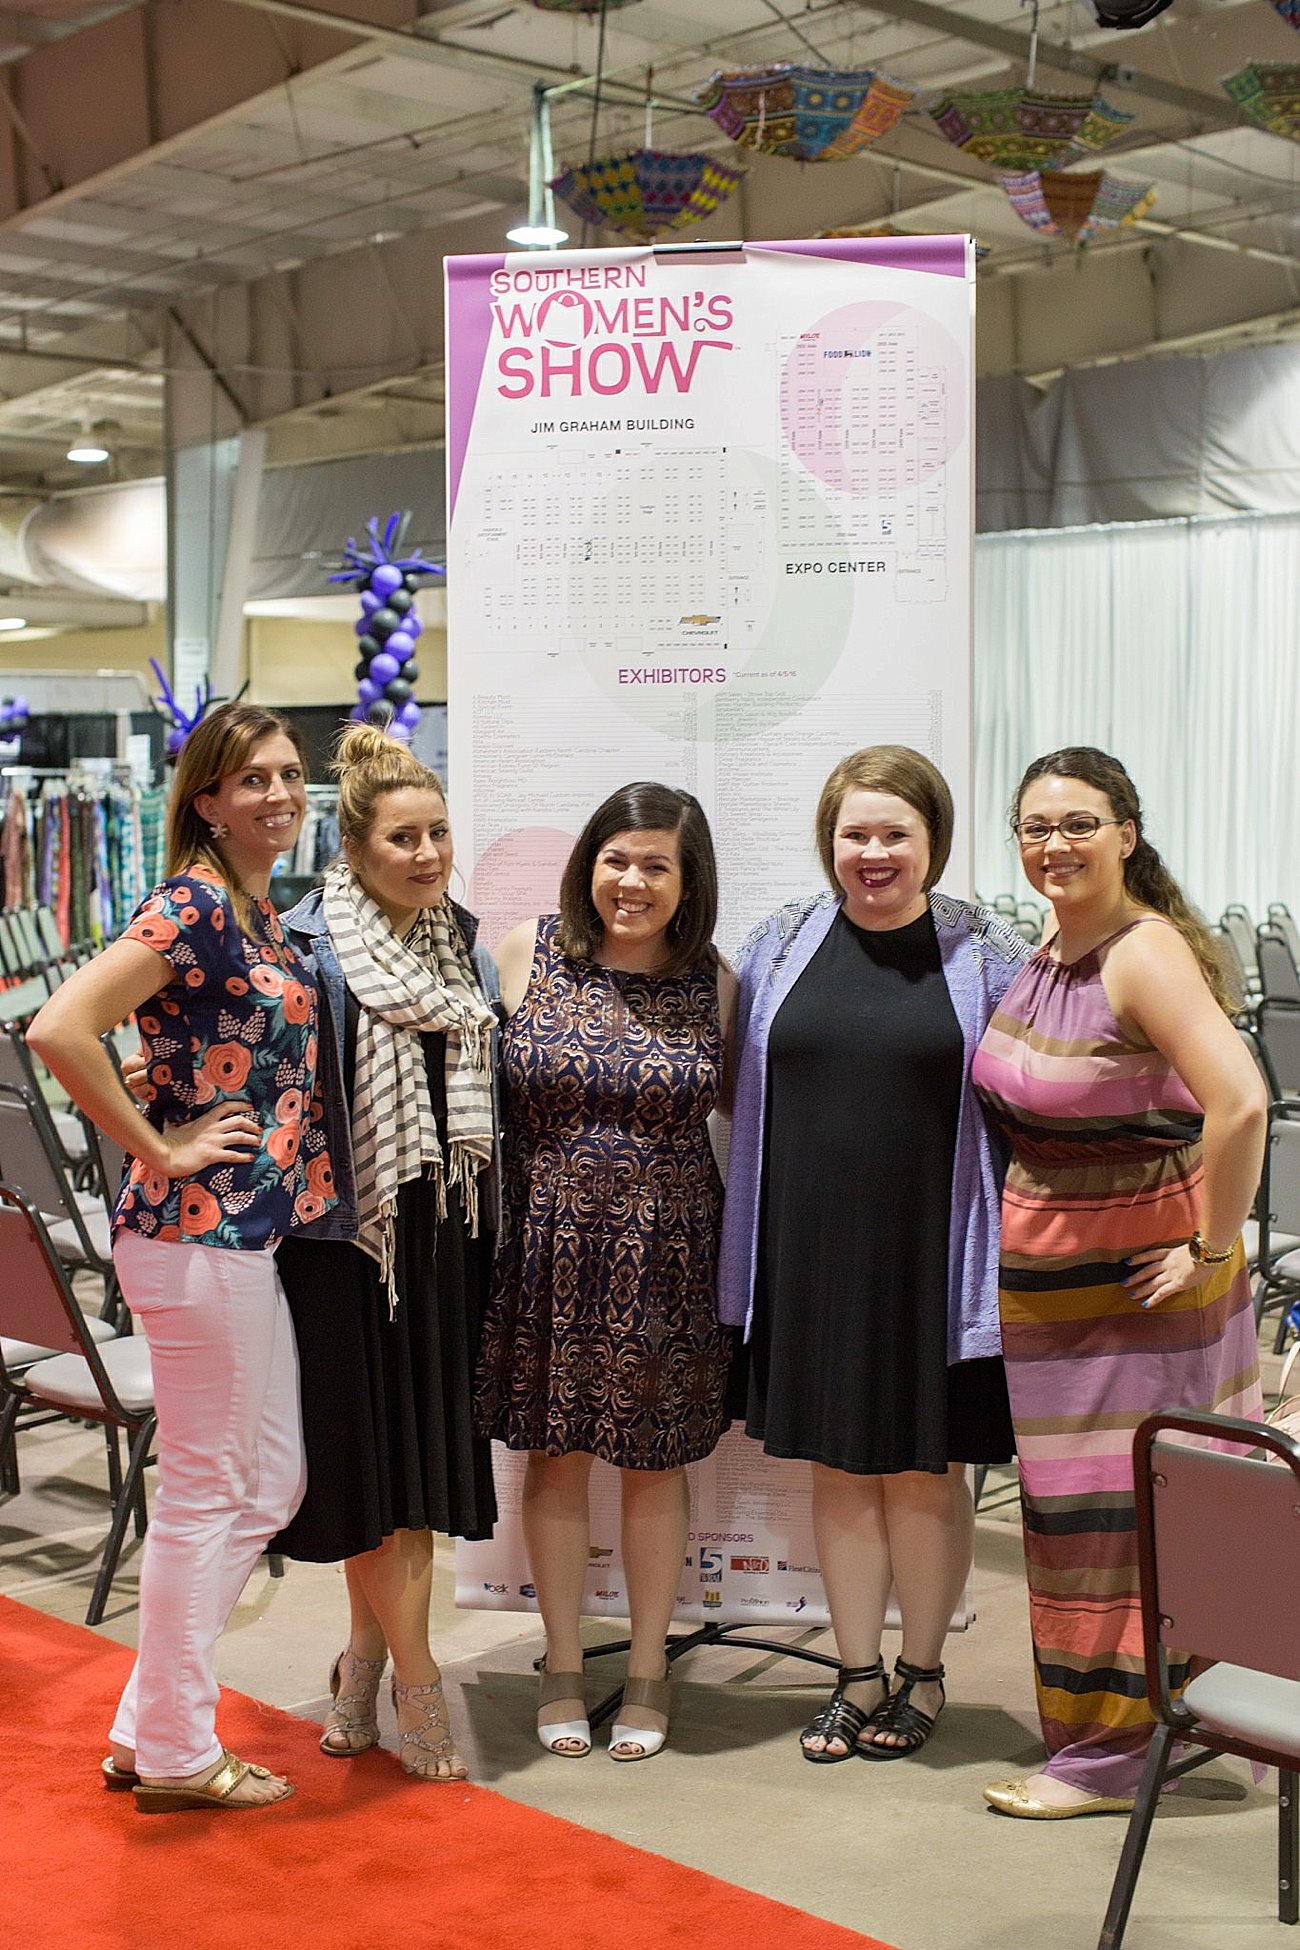 "Dressing with Purpose" Ethical Fashion Show at the Southern Women's Show in Raleigh, North Carolina 2016 | triFABB and Still Being Molly | North Carolina Fashion & Style Blogger (2)